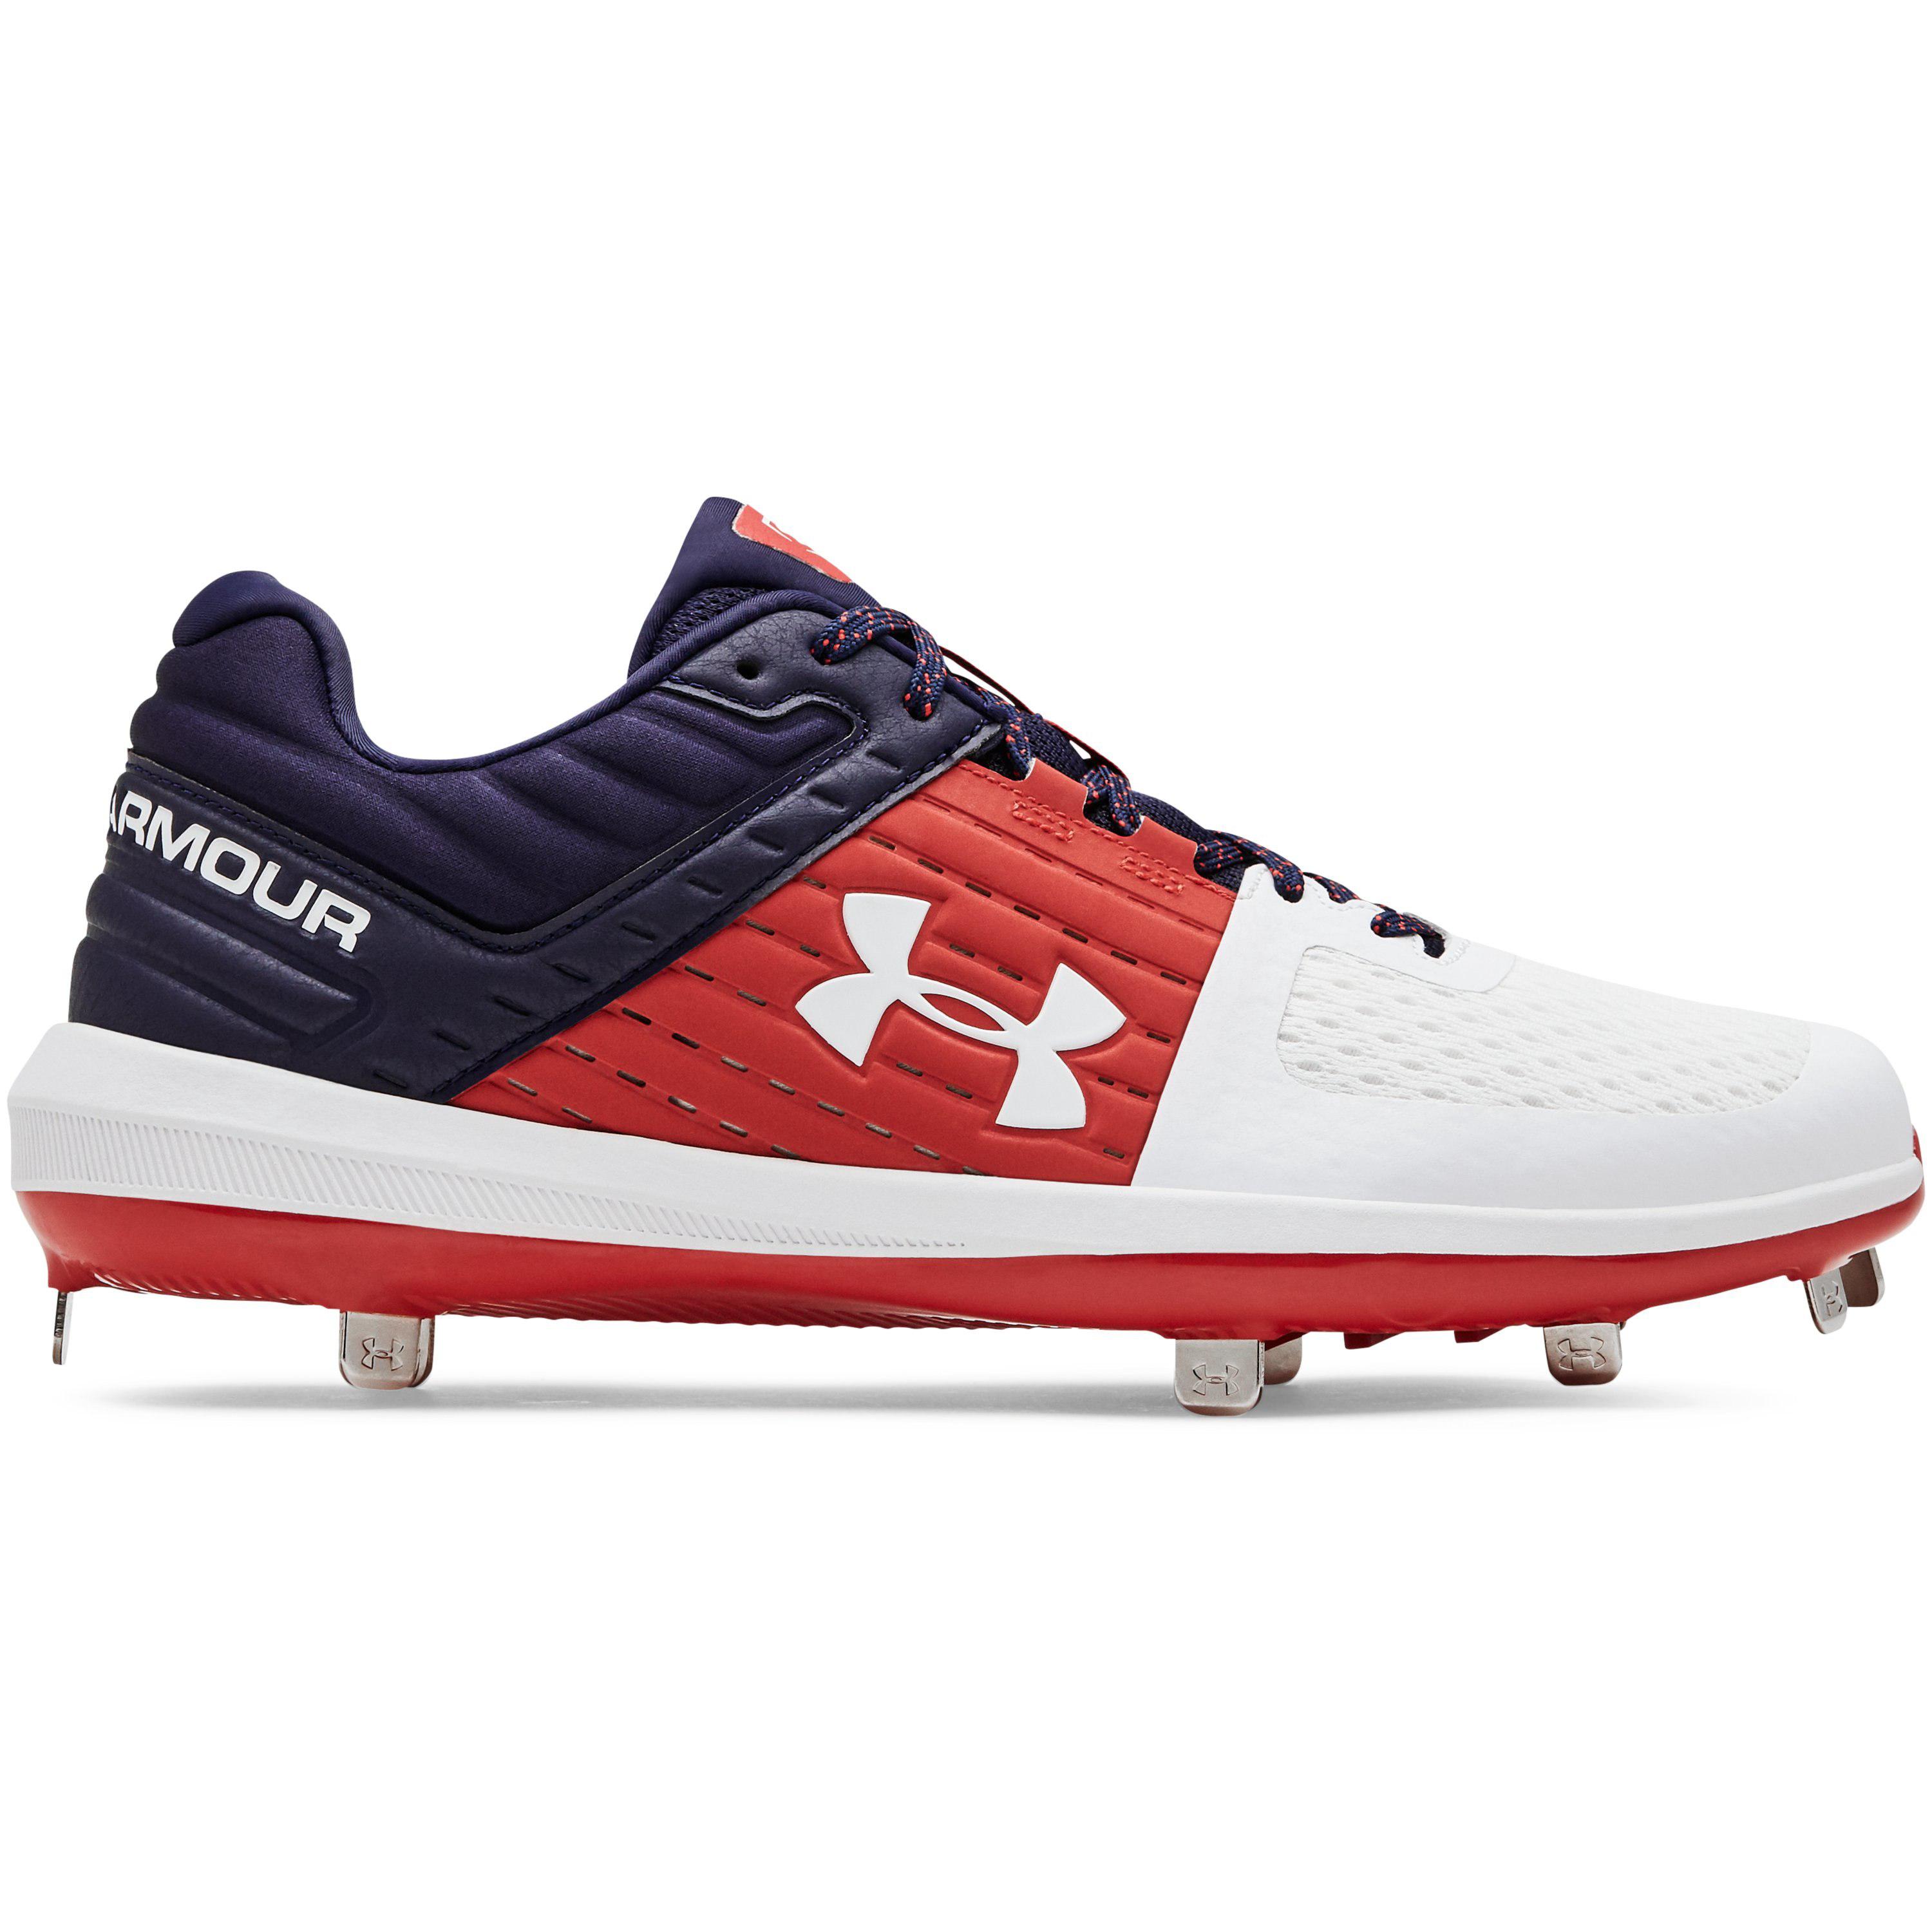 Under Armour Men's Ua Yard Low St Baseball Cleats in Navy/Red (Red 